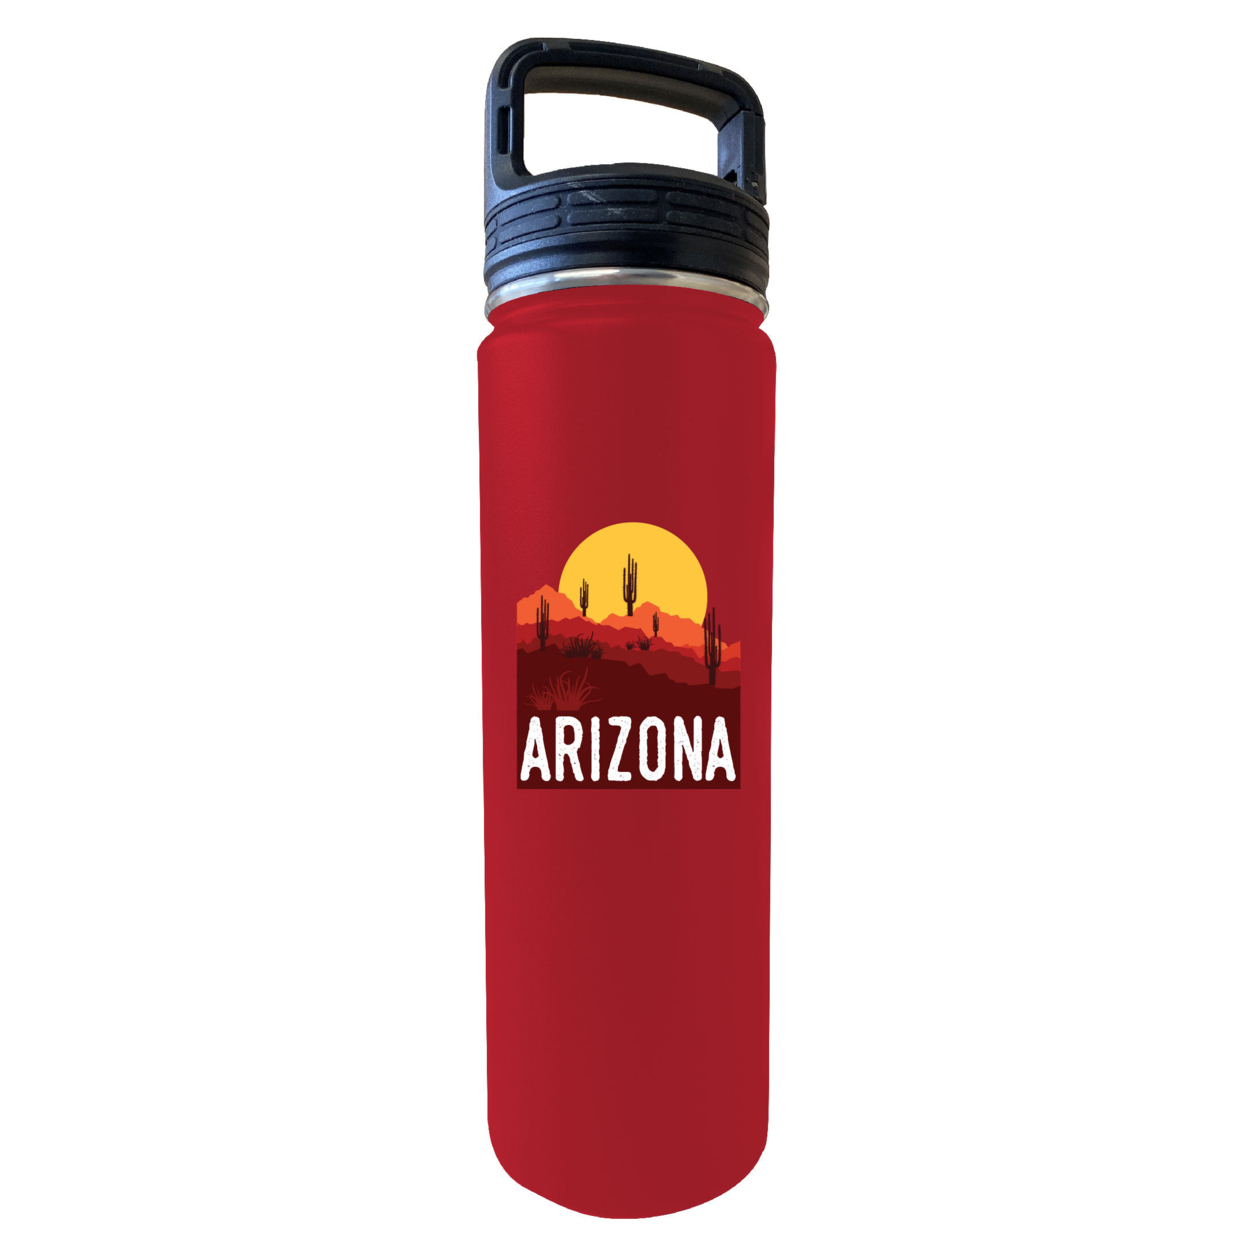 Arizona Souvenir Desert 32 Oz Engraved Insulated Double Wall Stainless Steel Water Bottle Tumbler - Red